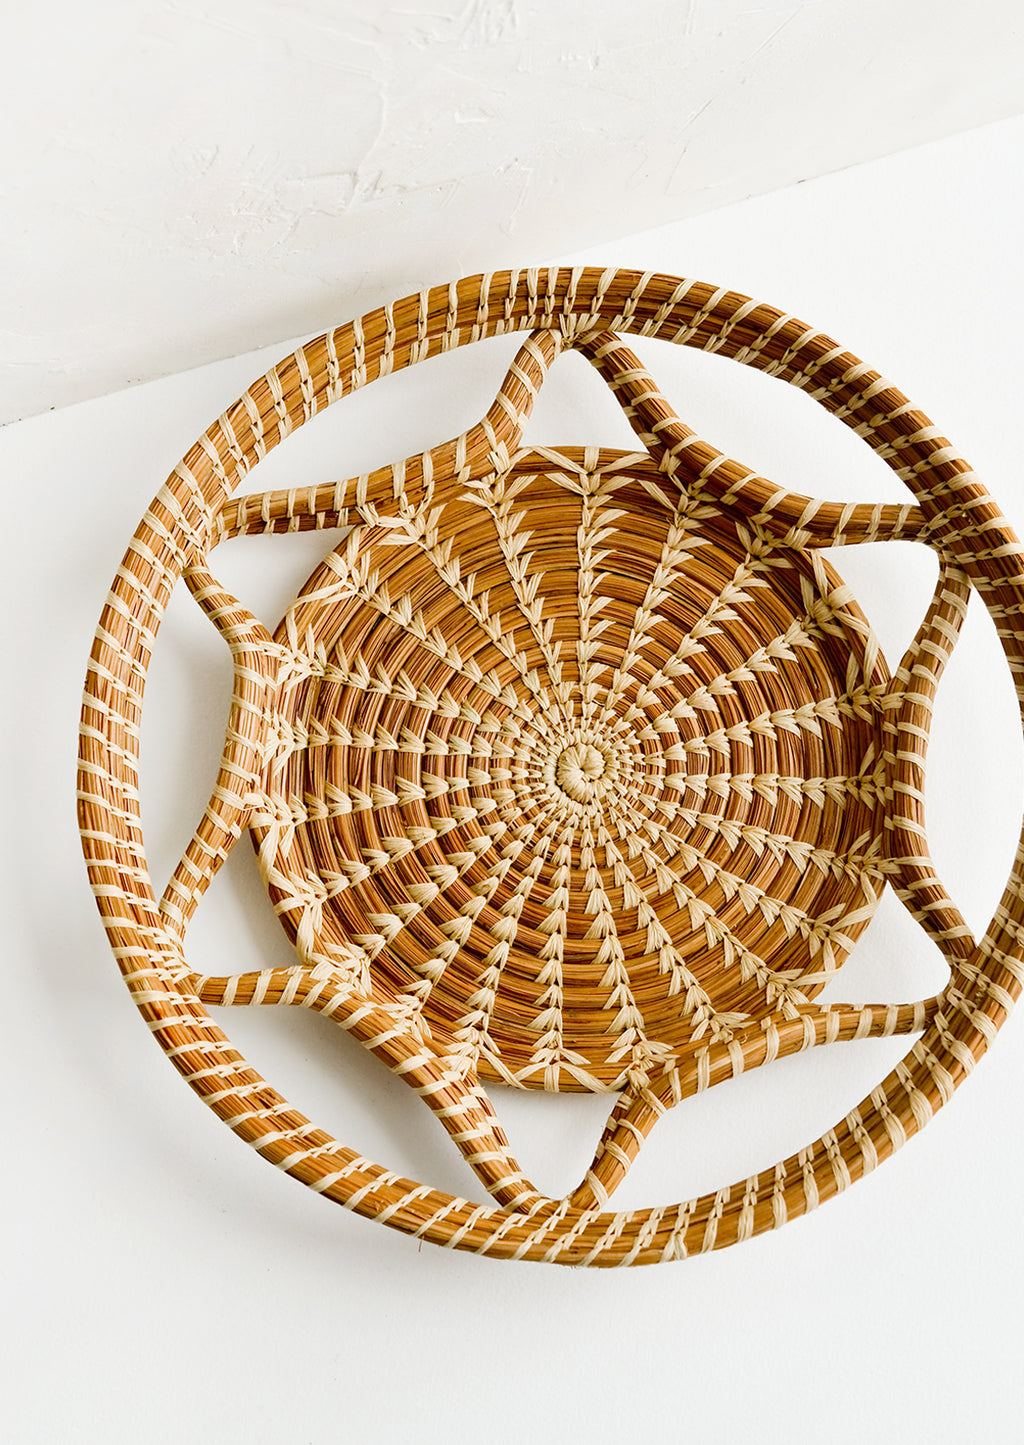 1: A round, flat tray with curved open weave design.